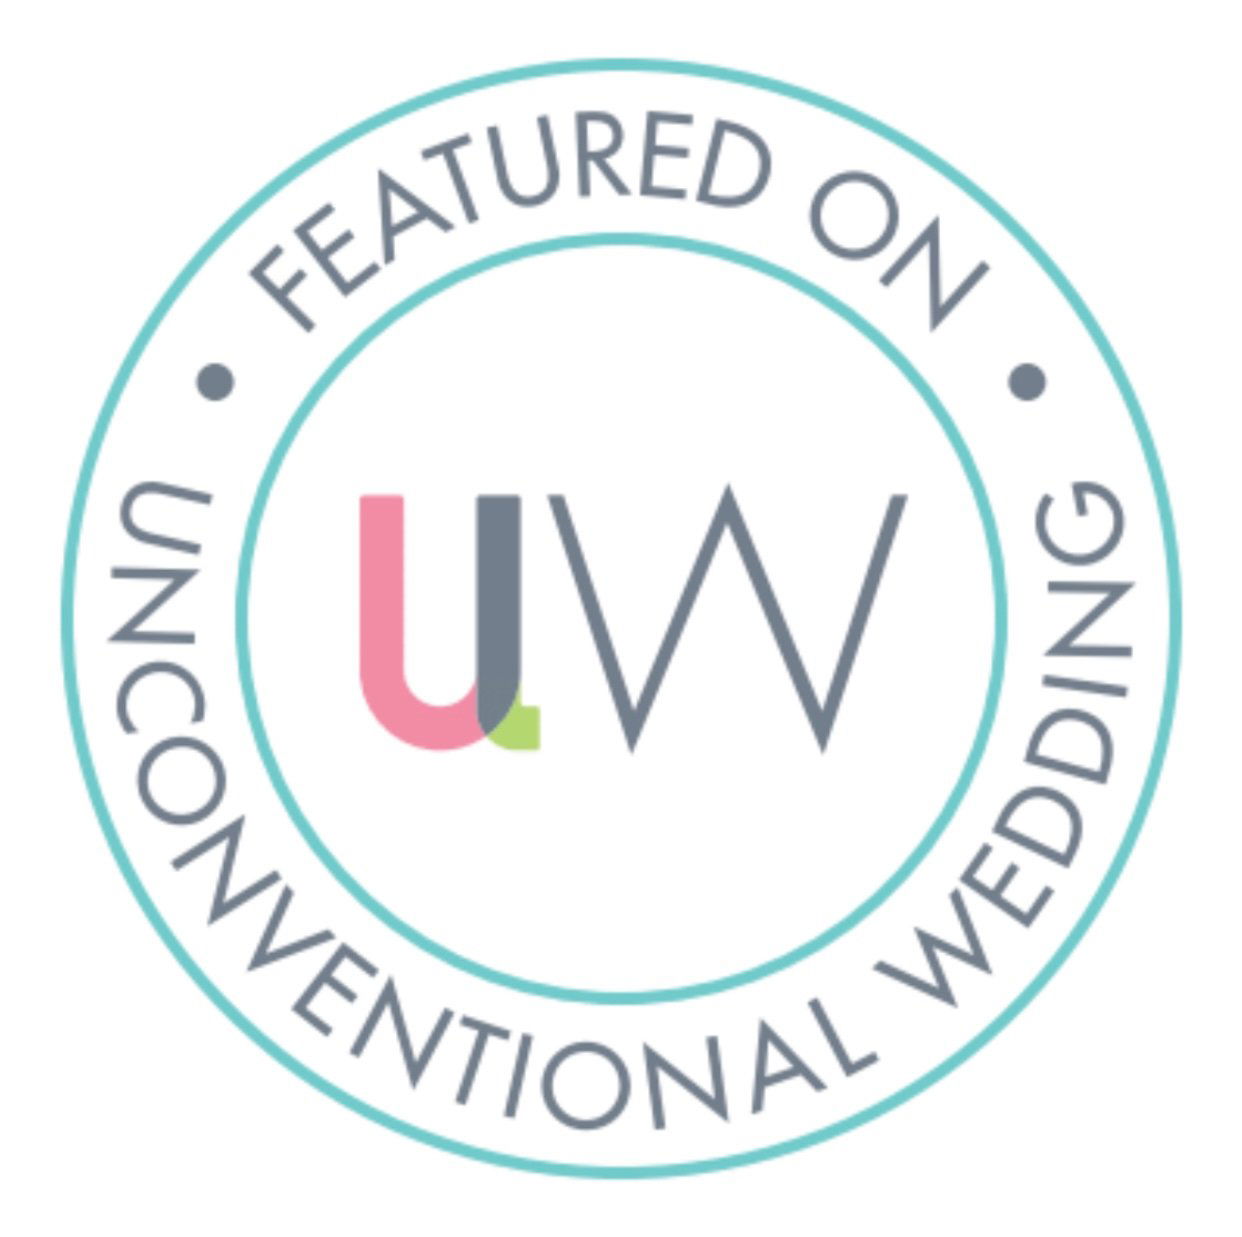 Featured again in Unconventional Wedding - December 2021